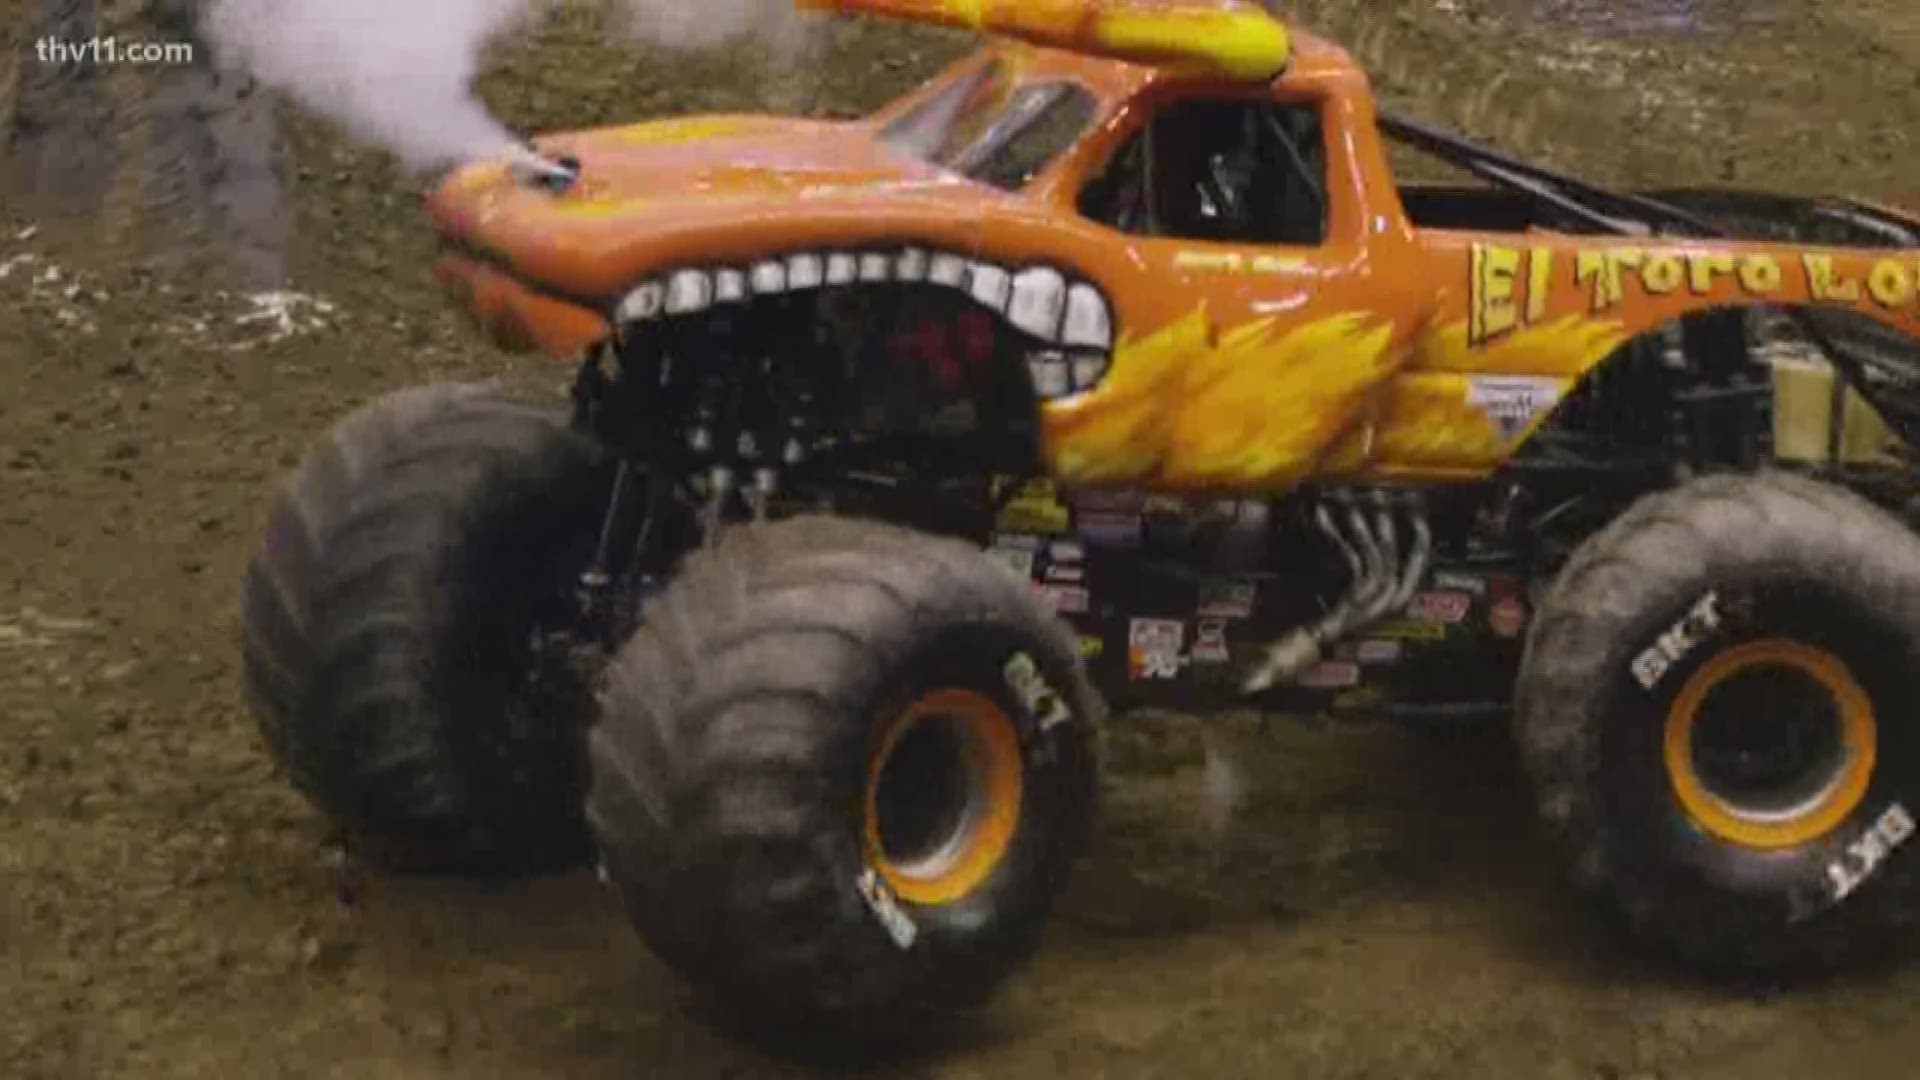 Go behind the scenes with Monster Jam's pit party